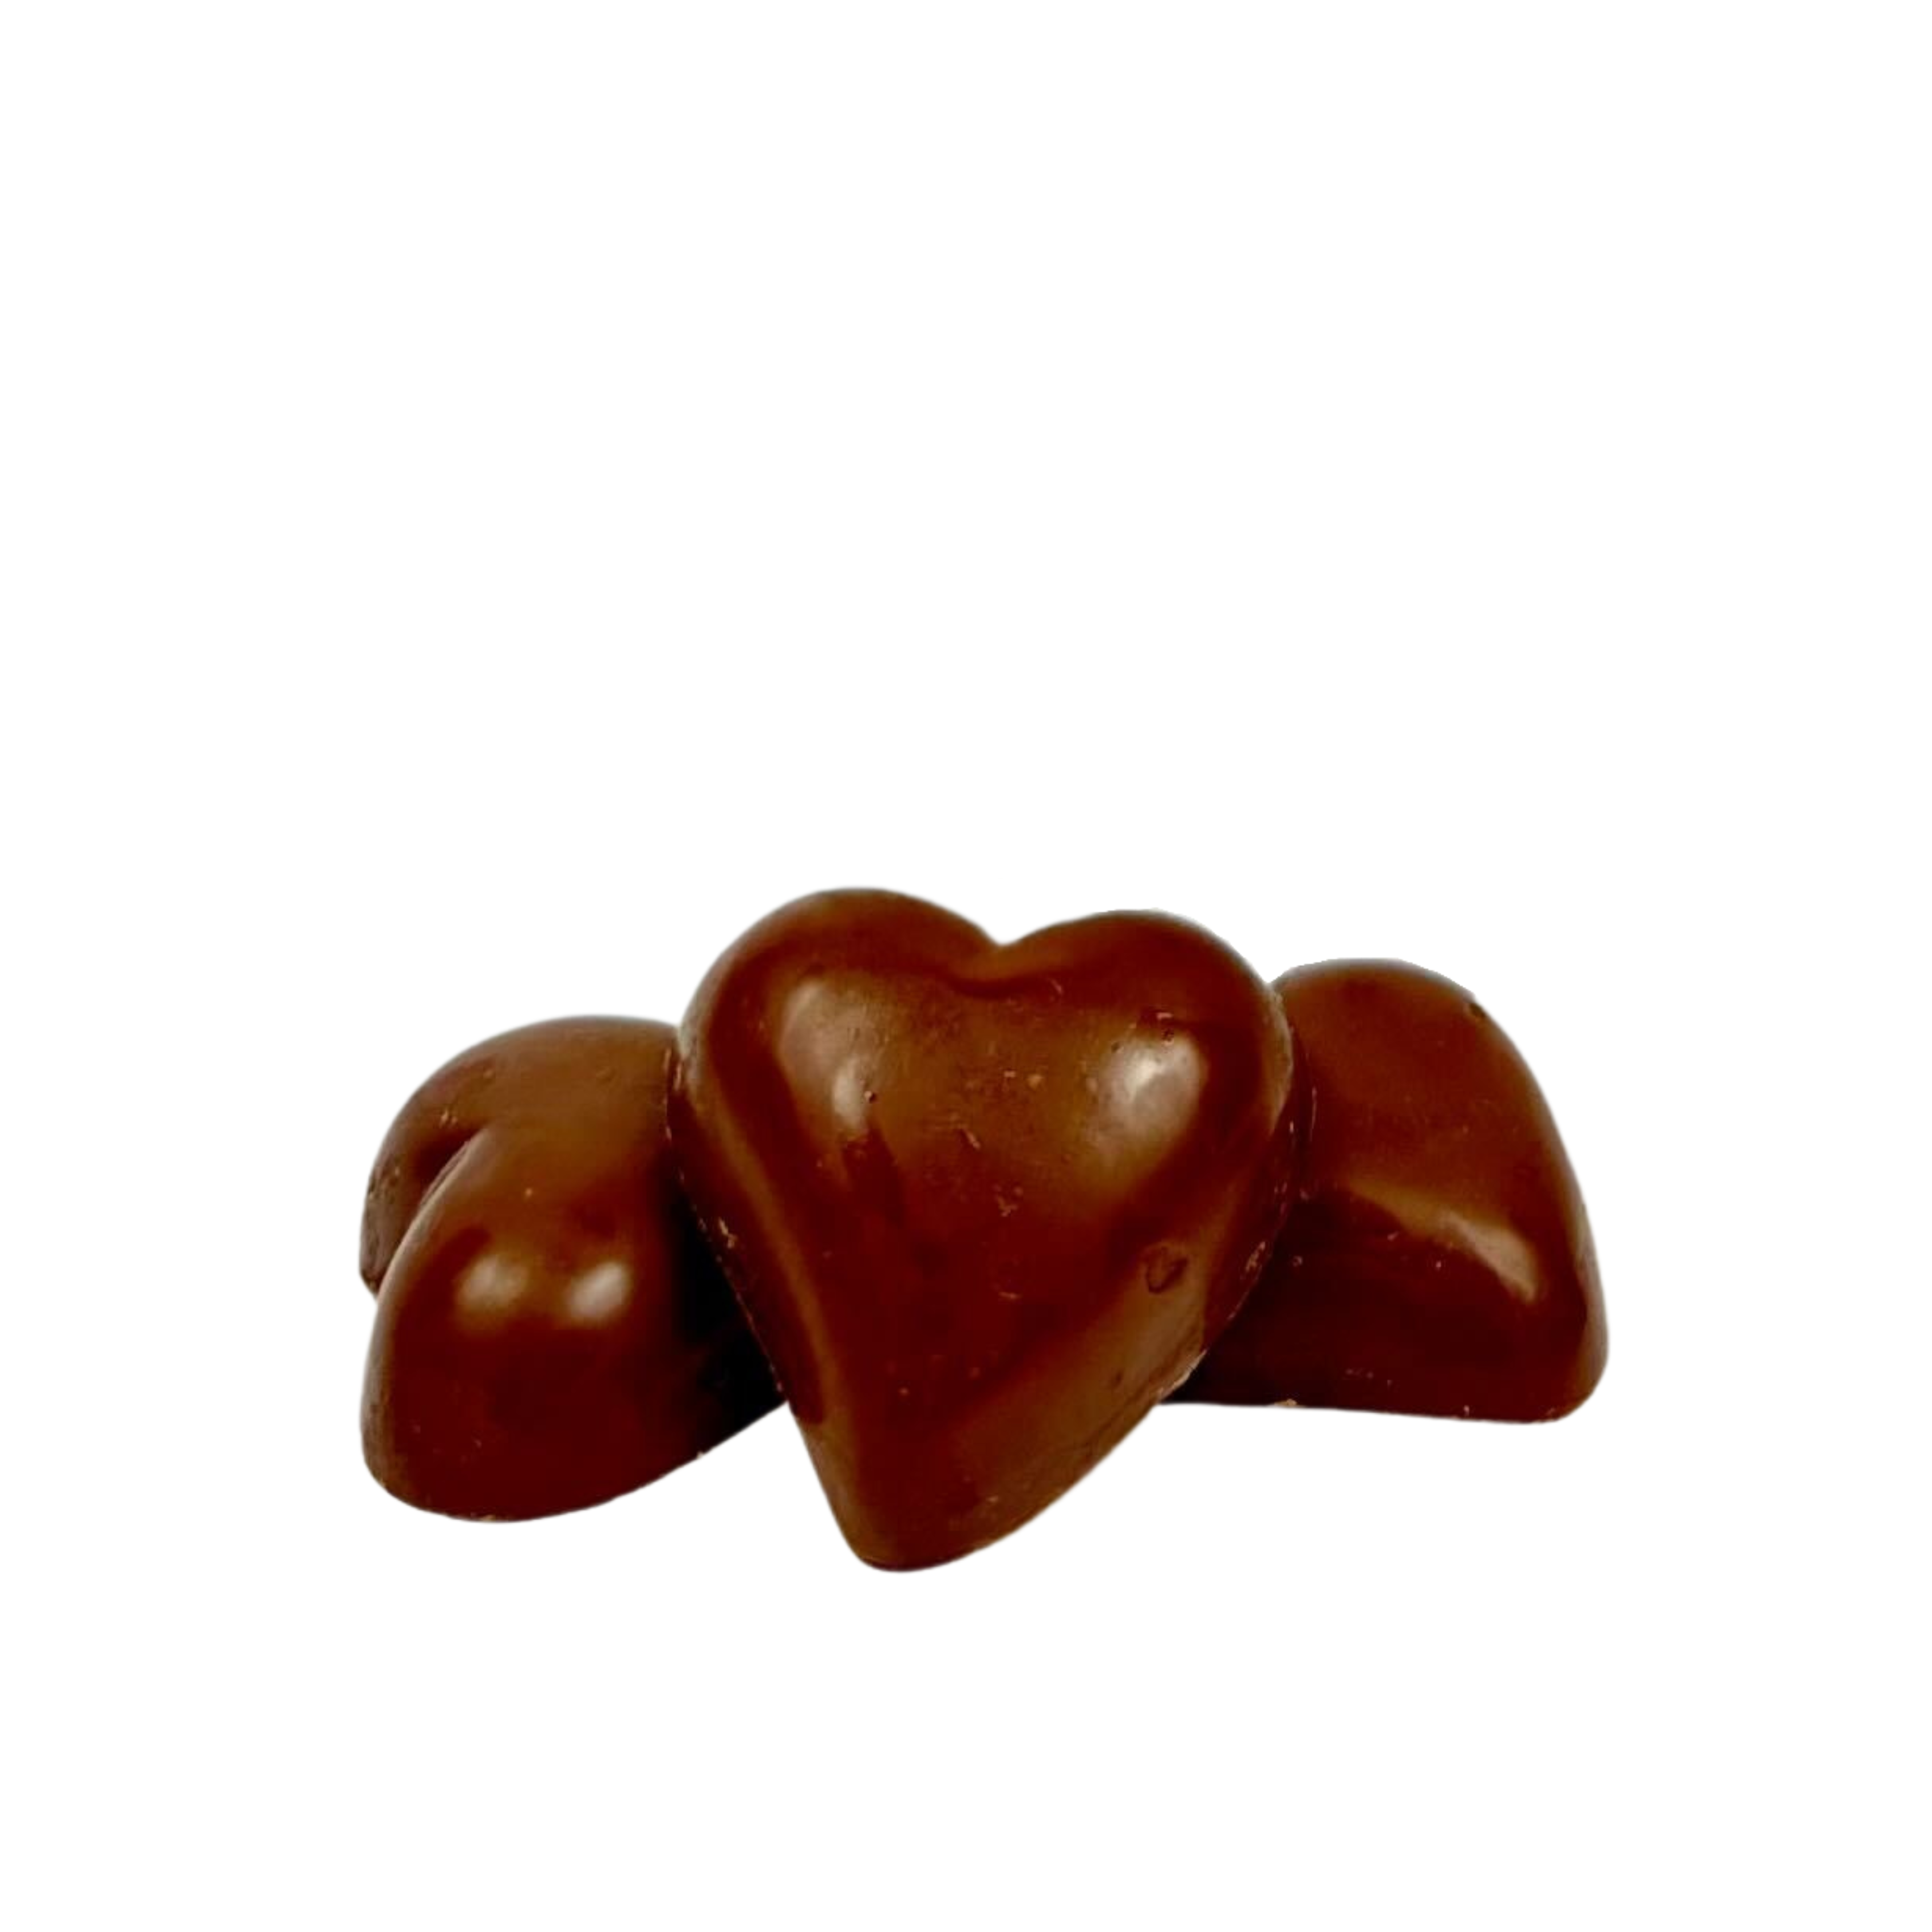 LIMITED EDITION - Love Truffles